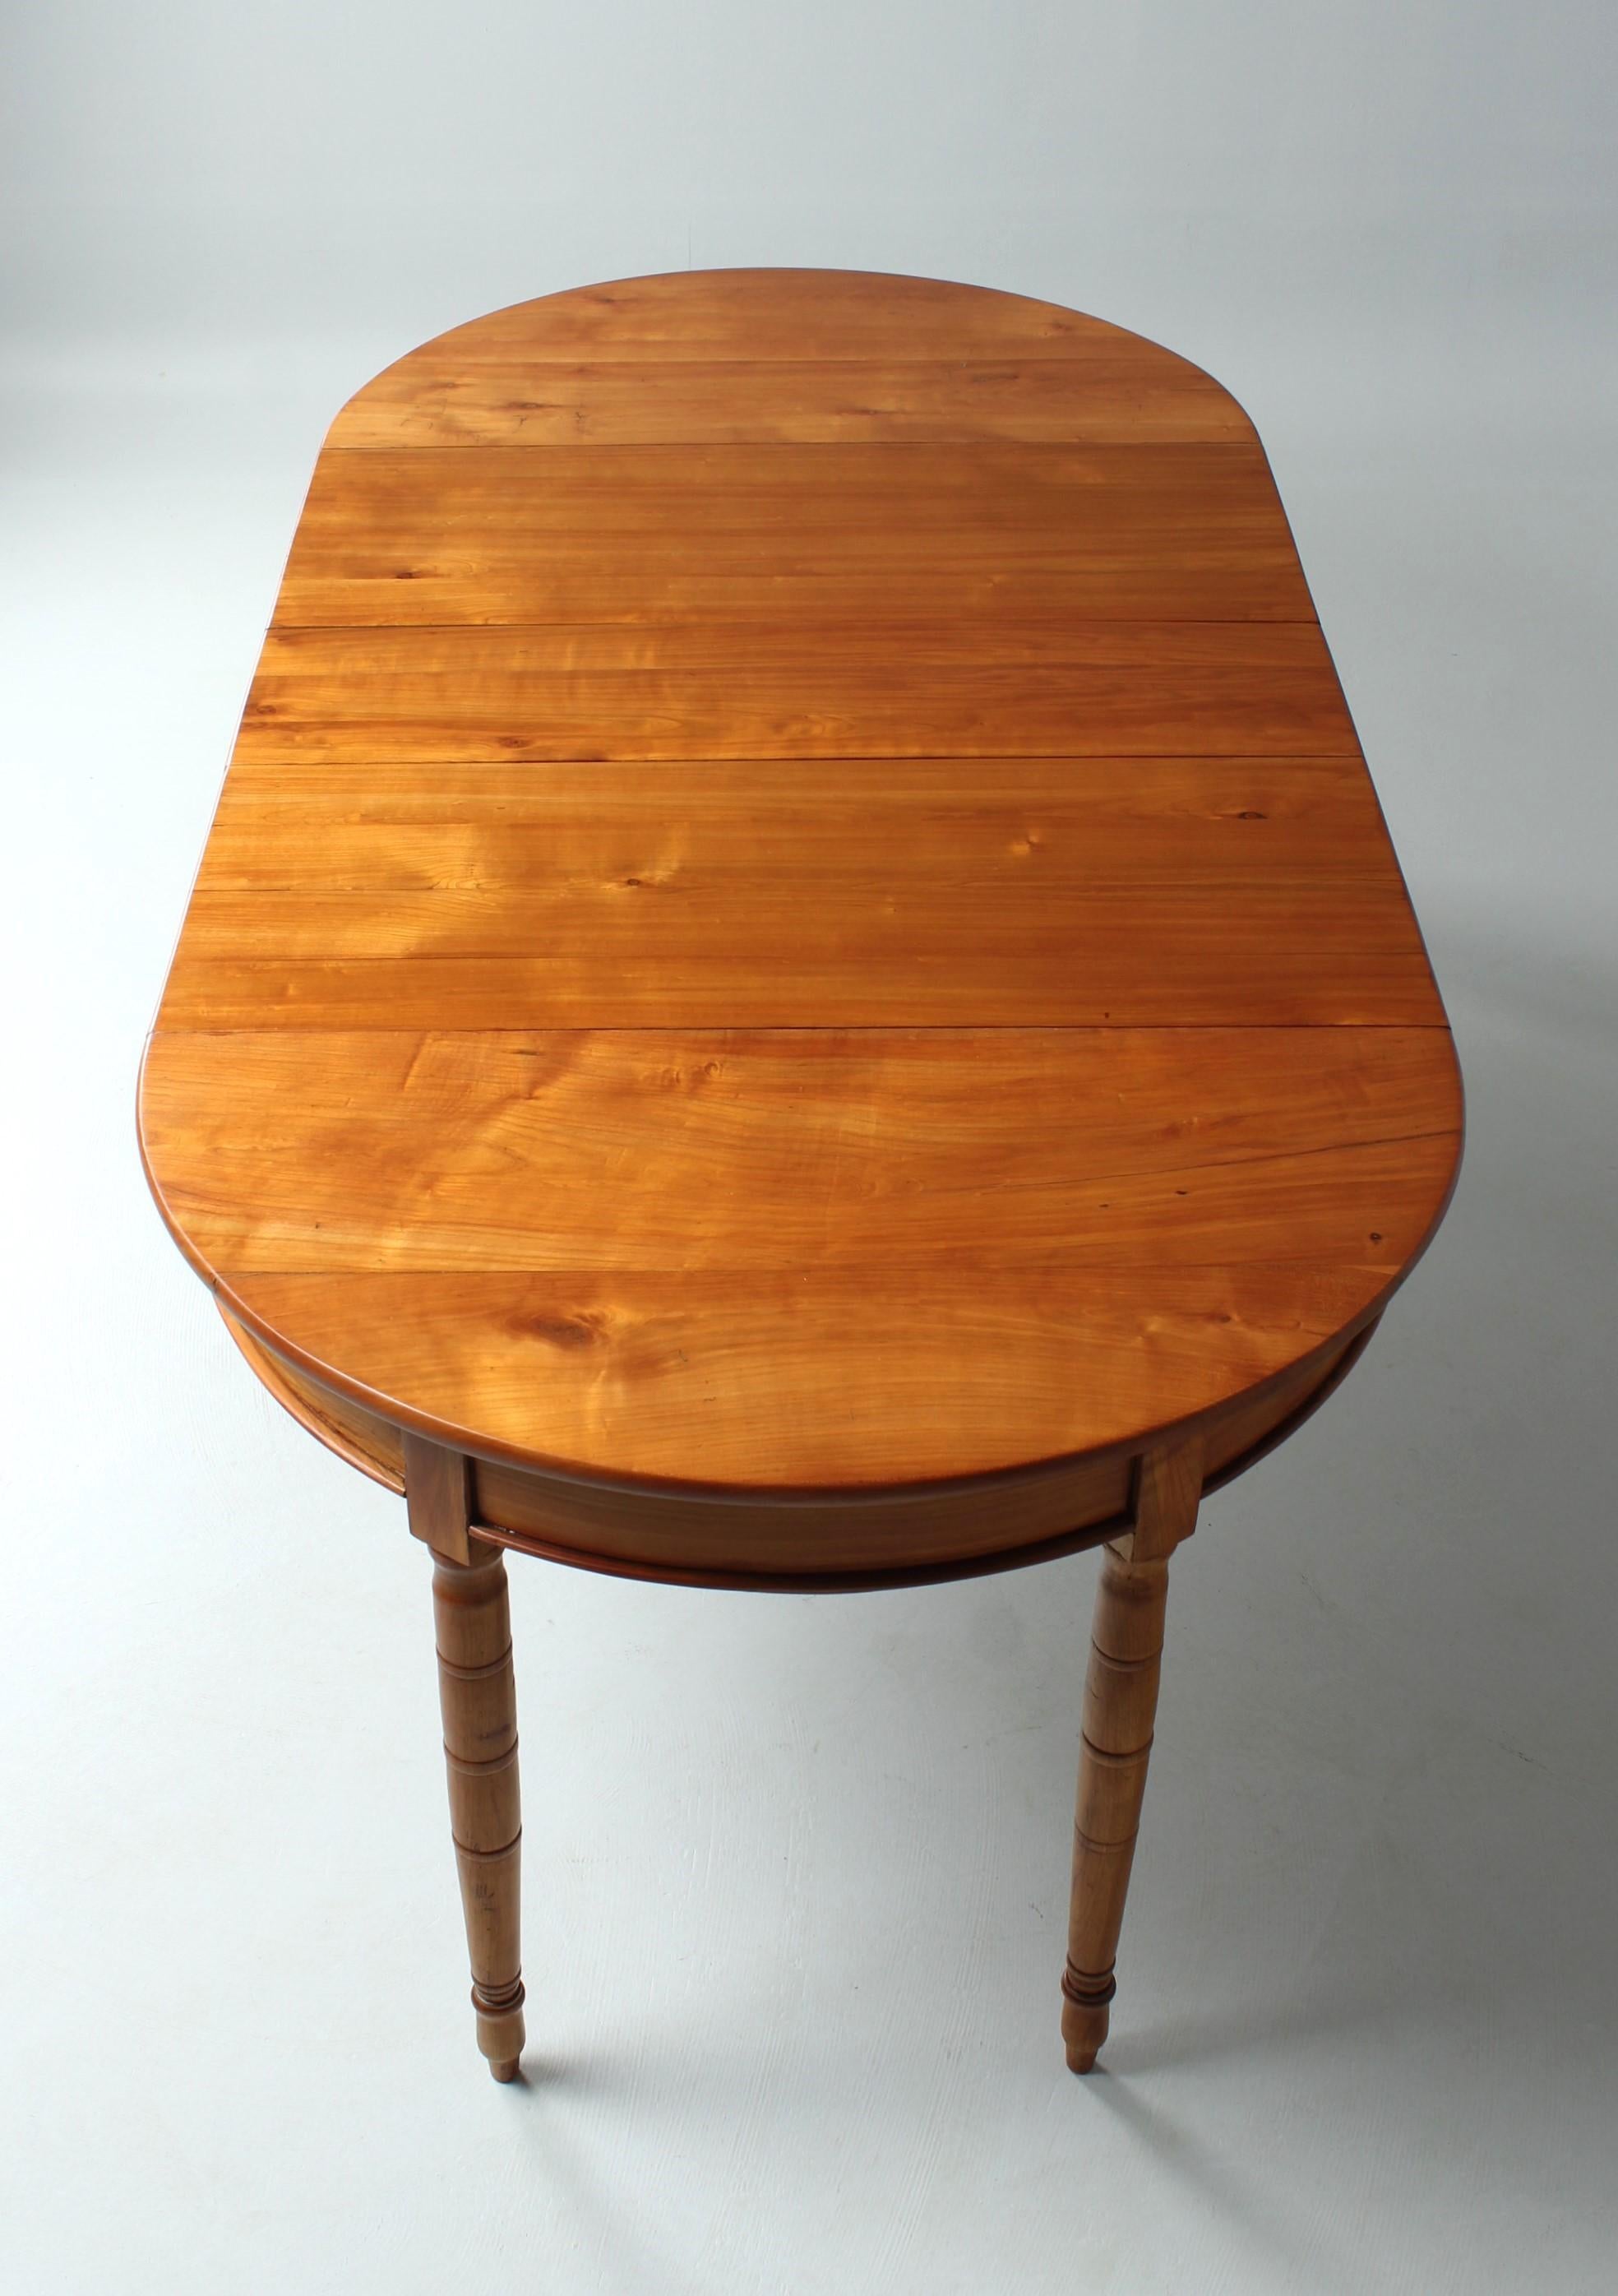 Extendable Cherrywood Dining Table, Germany, Mid 19th Century For Sale 9